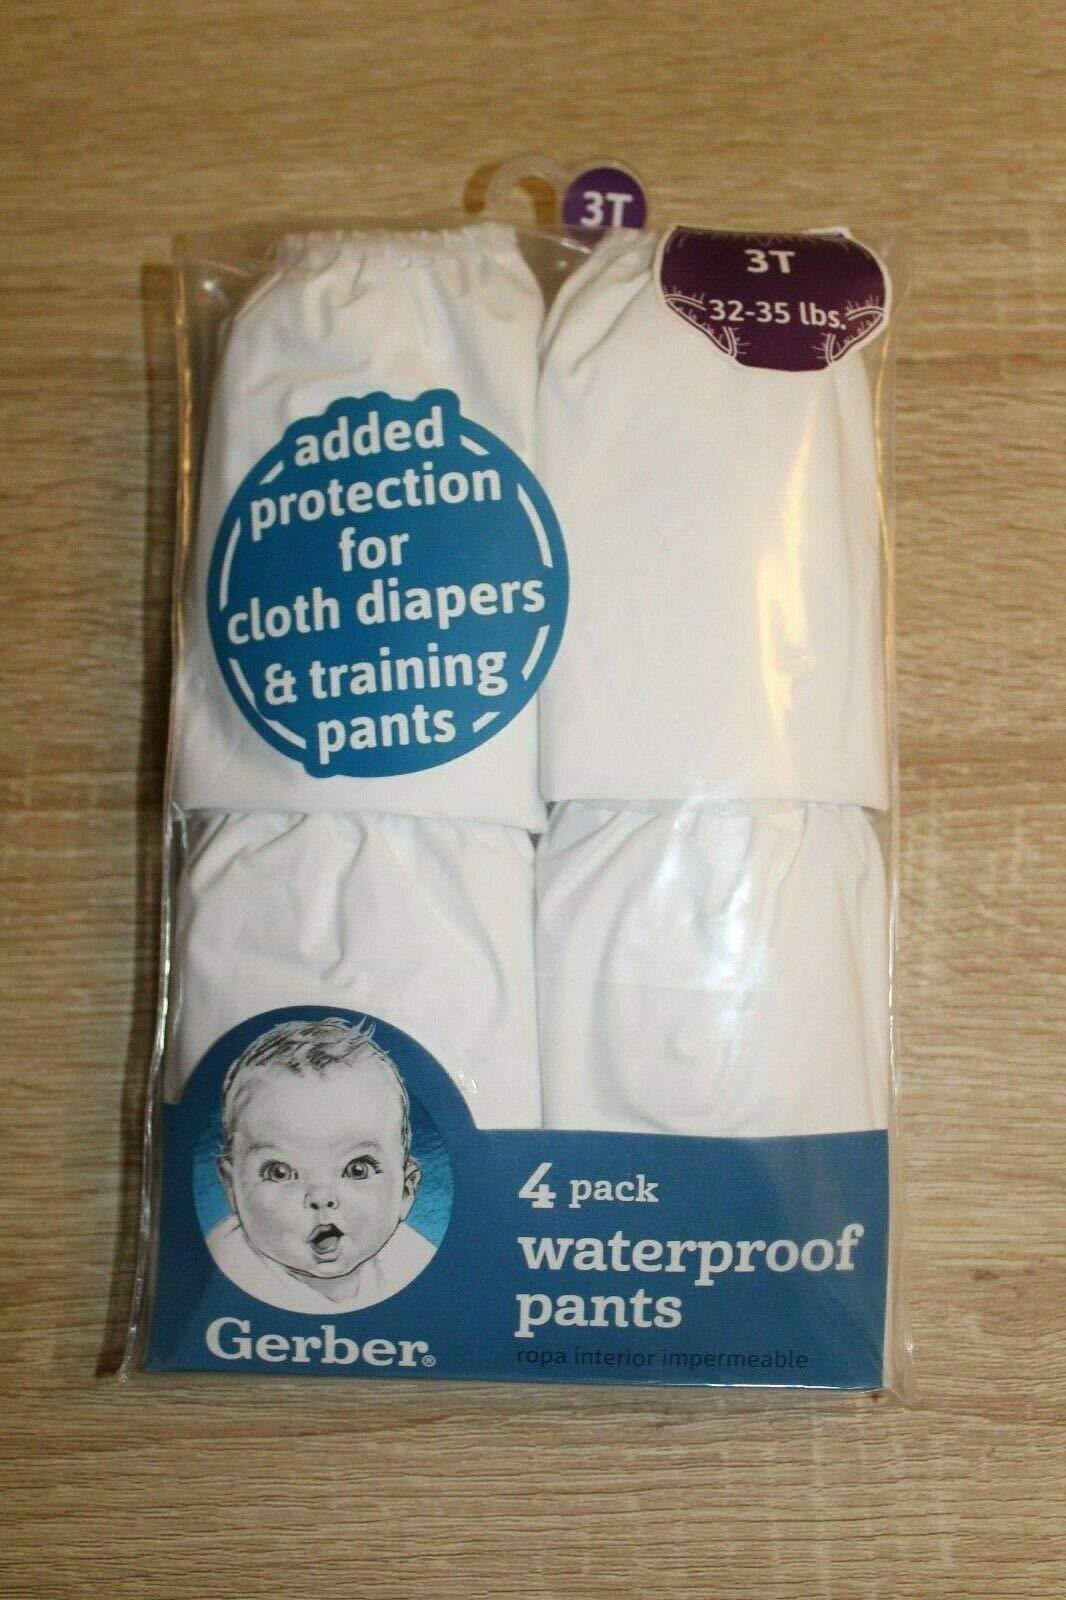 Gerber Plastic Pants, 3T, Fits 32-35 lbs. (4 Pairs) 8 Count (Pack of 1)